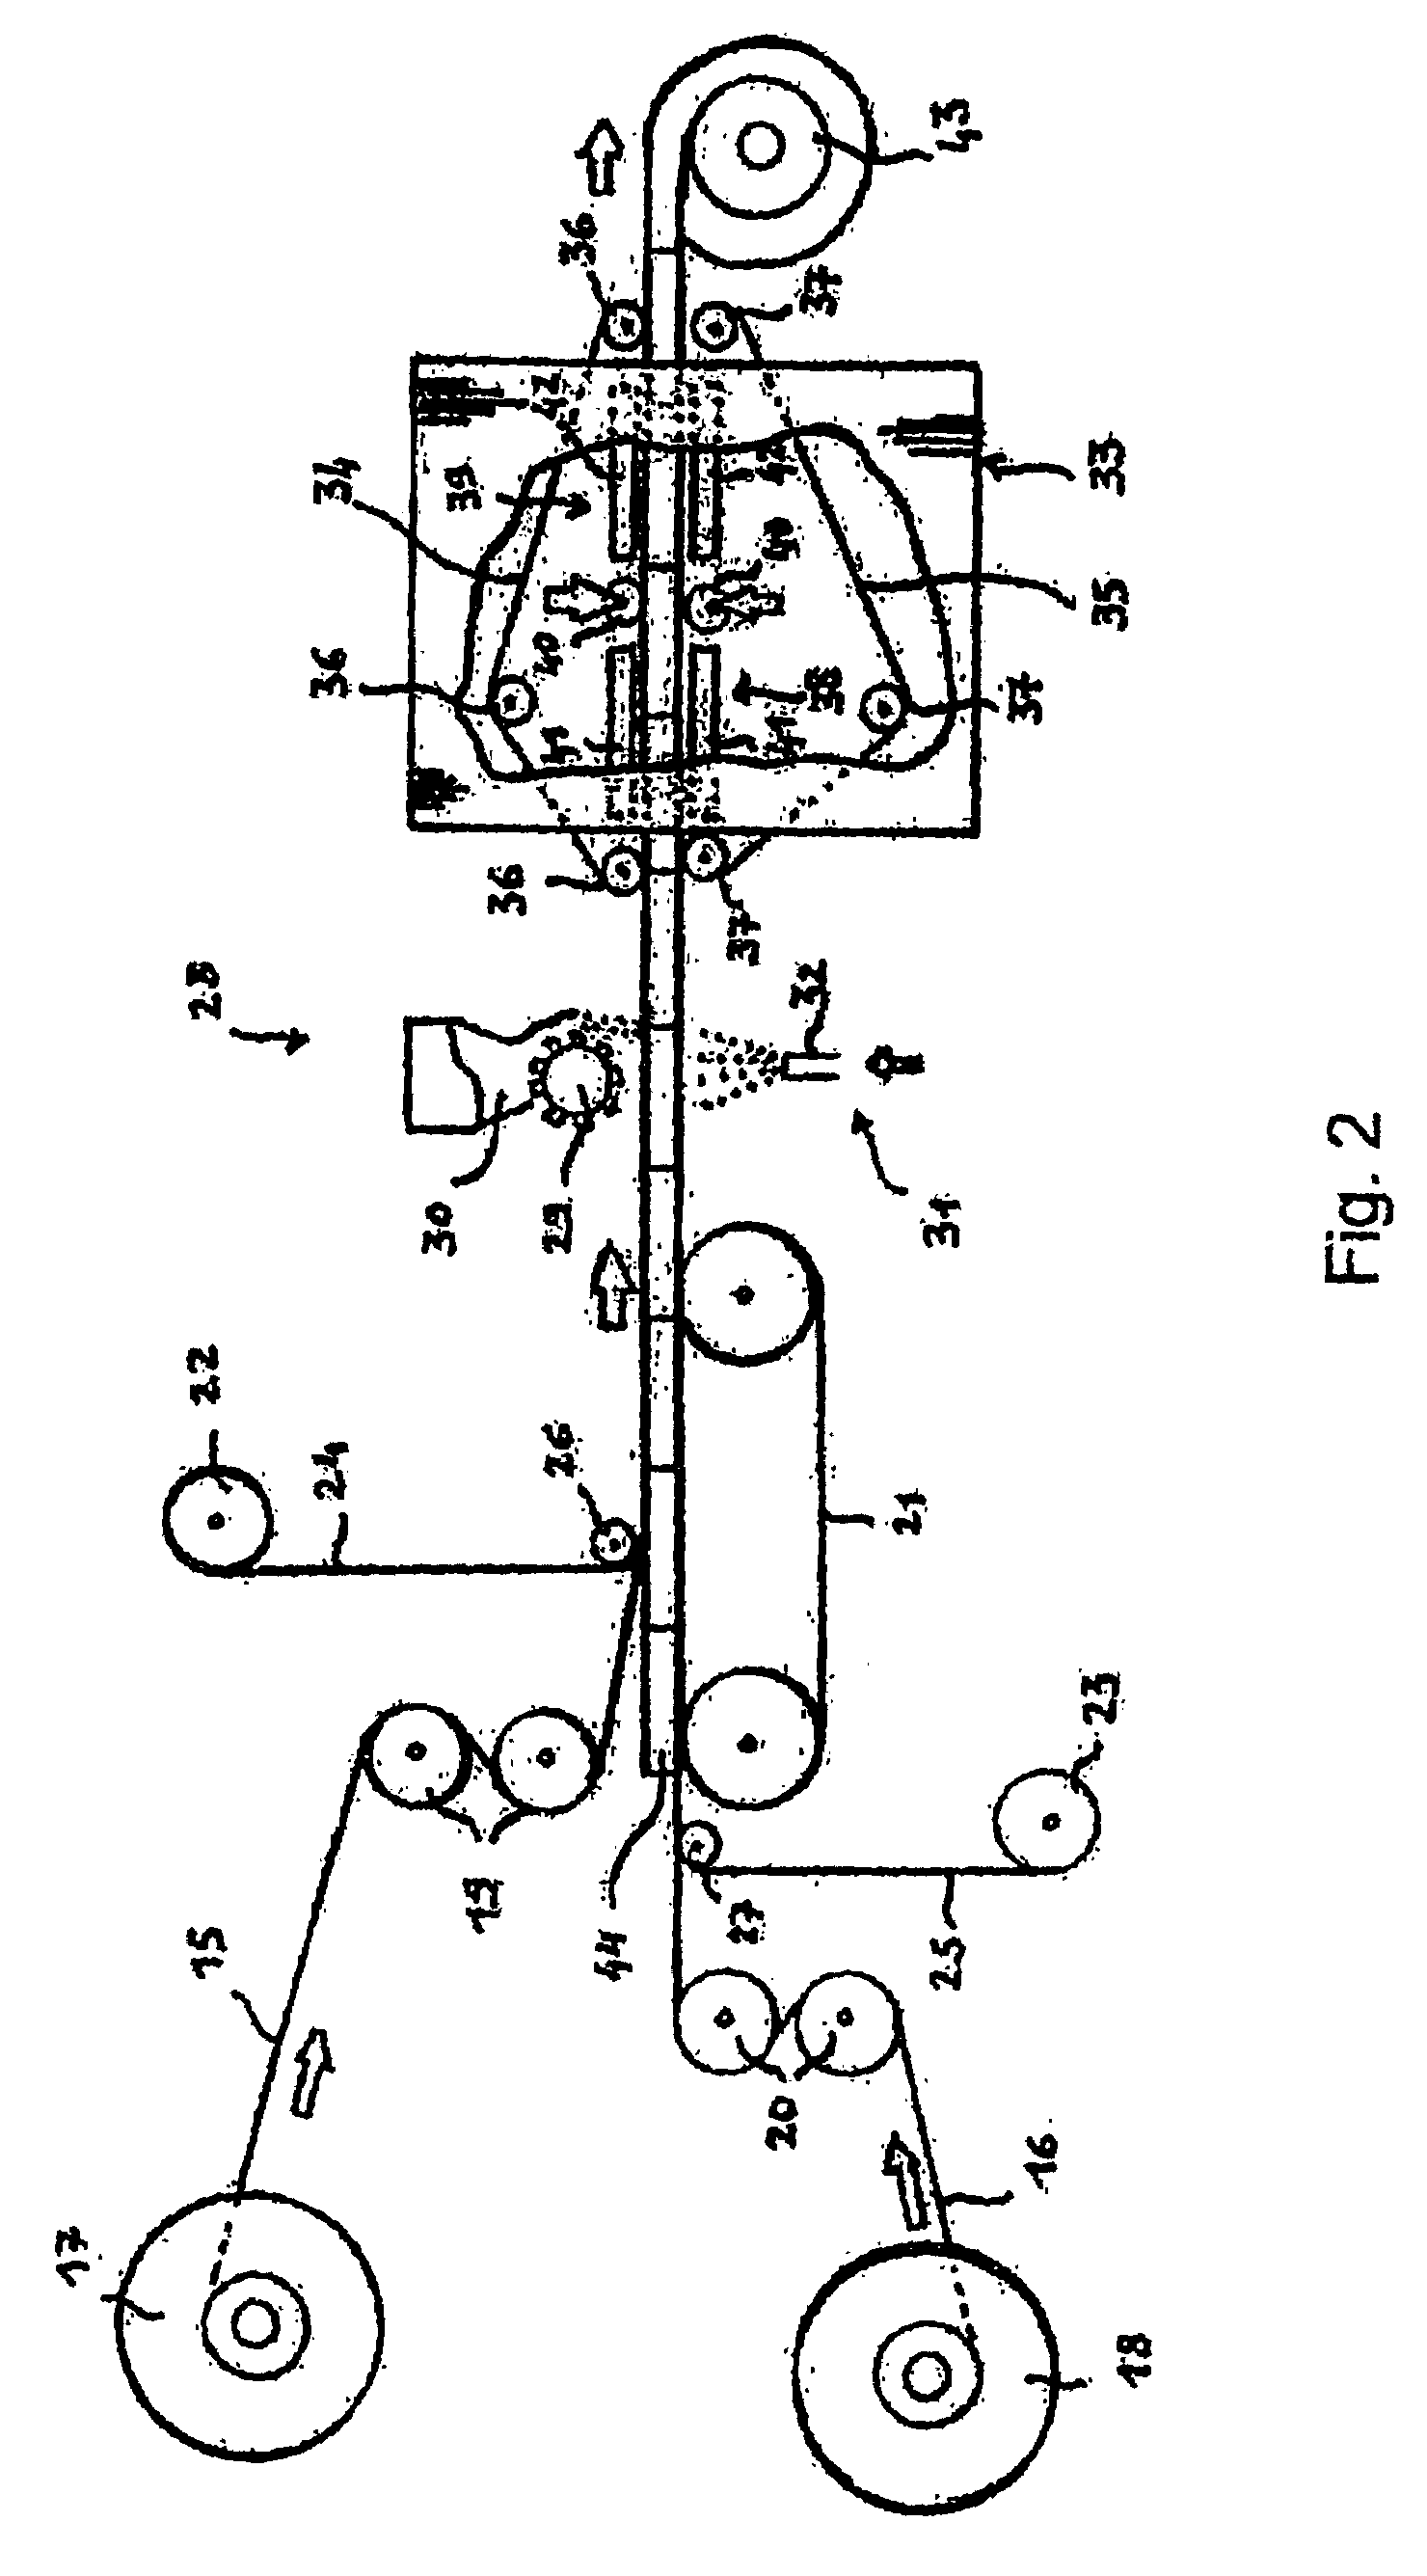 Method and device for making a composite plate